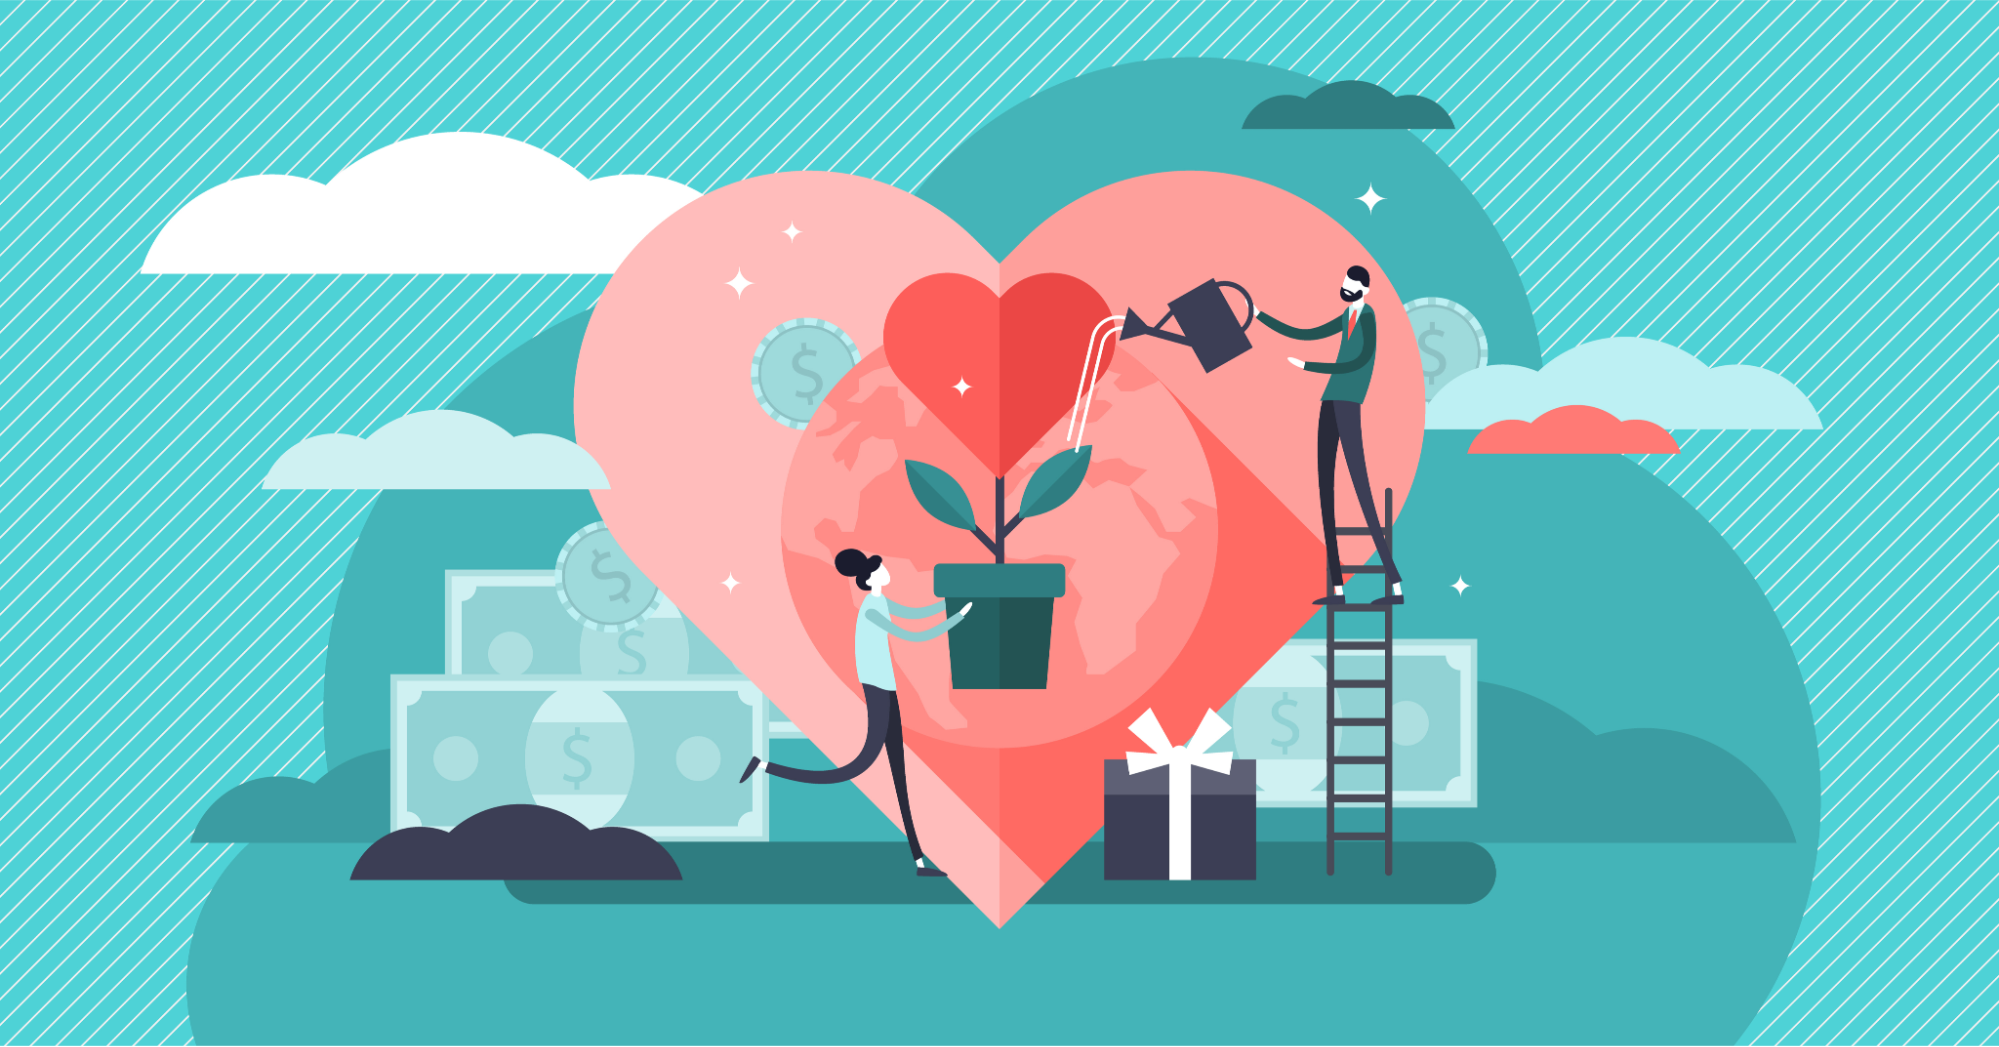 Image depicting fundraising as a metaphor for spreading love and growing.